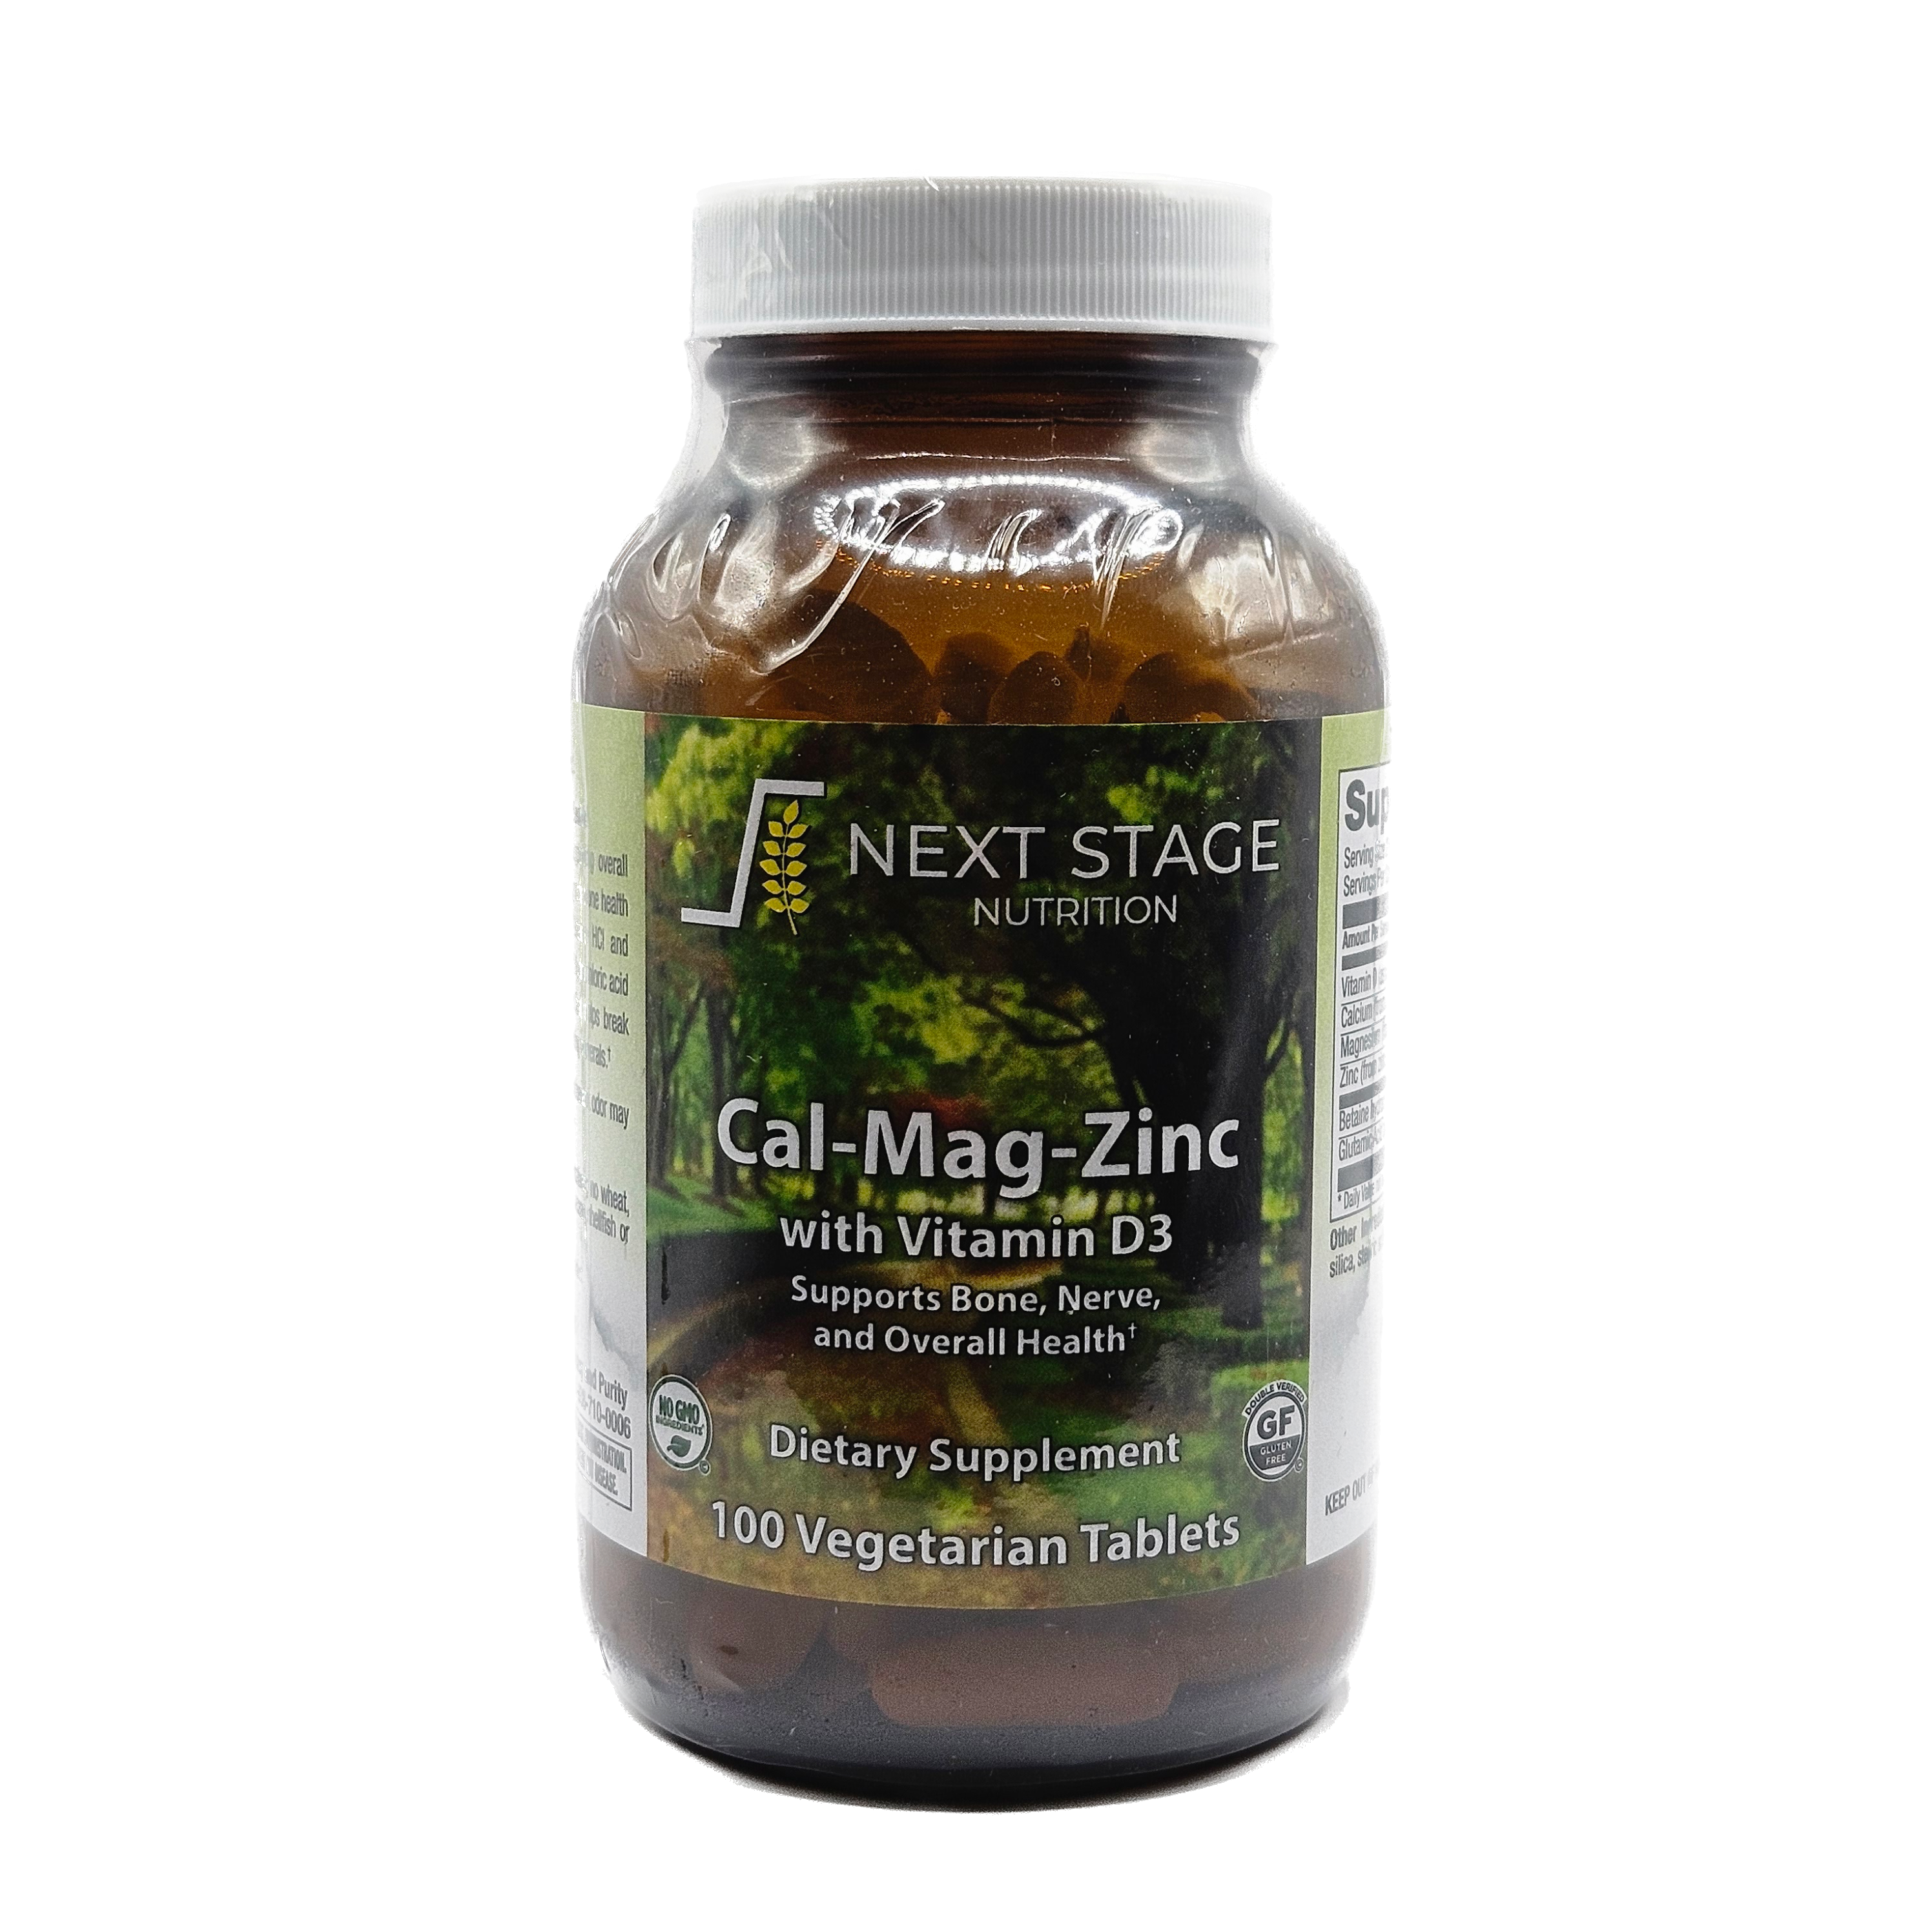 Next Stage Cal-Mag-Zinc with Vitamin D3